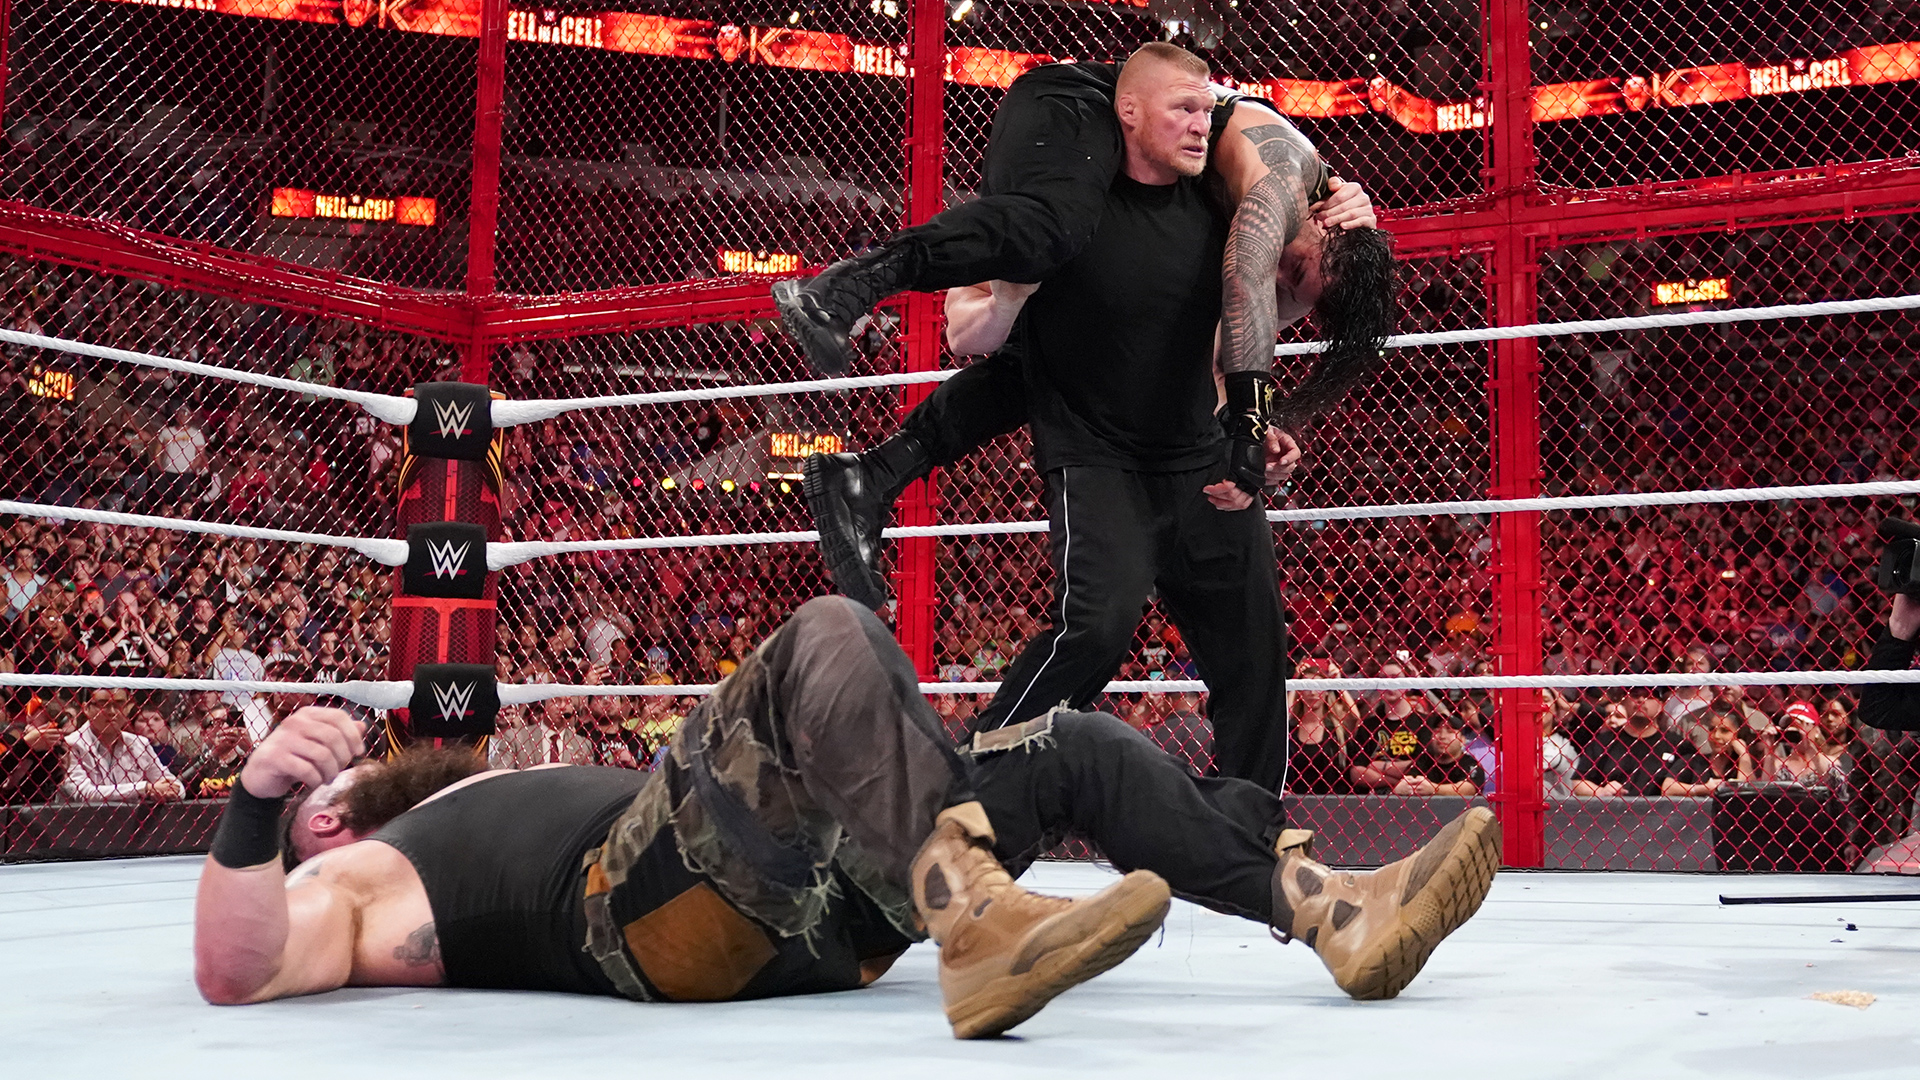 Wwe Hell In A Cell 2018 - HD Wallpaper 